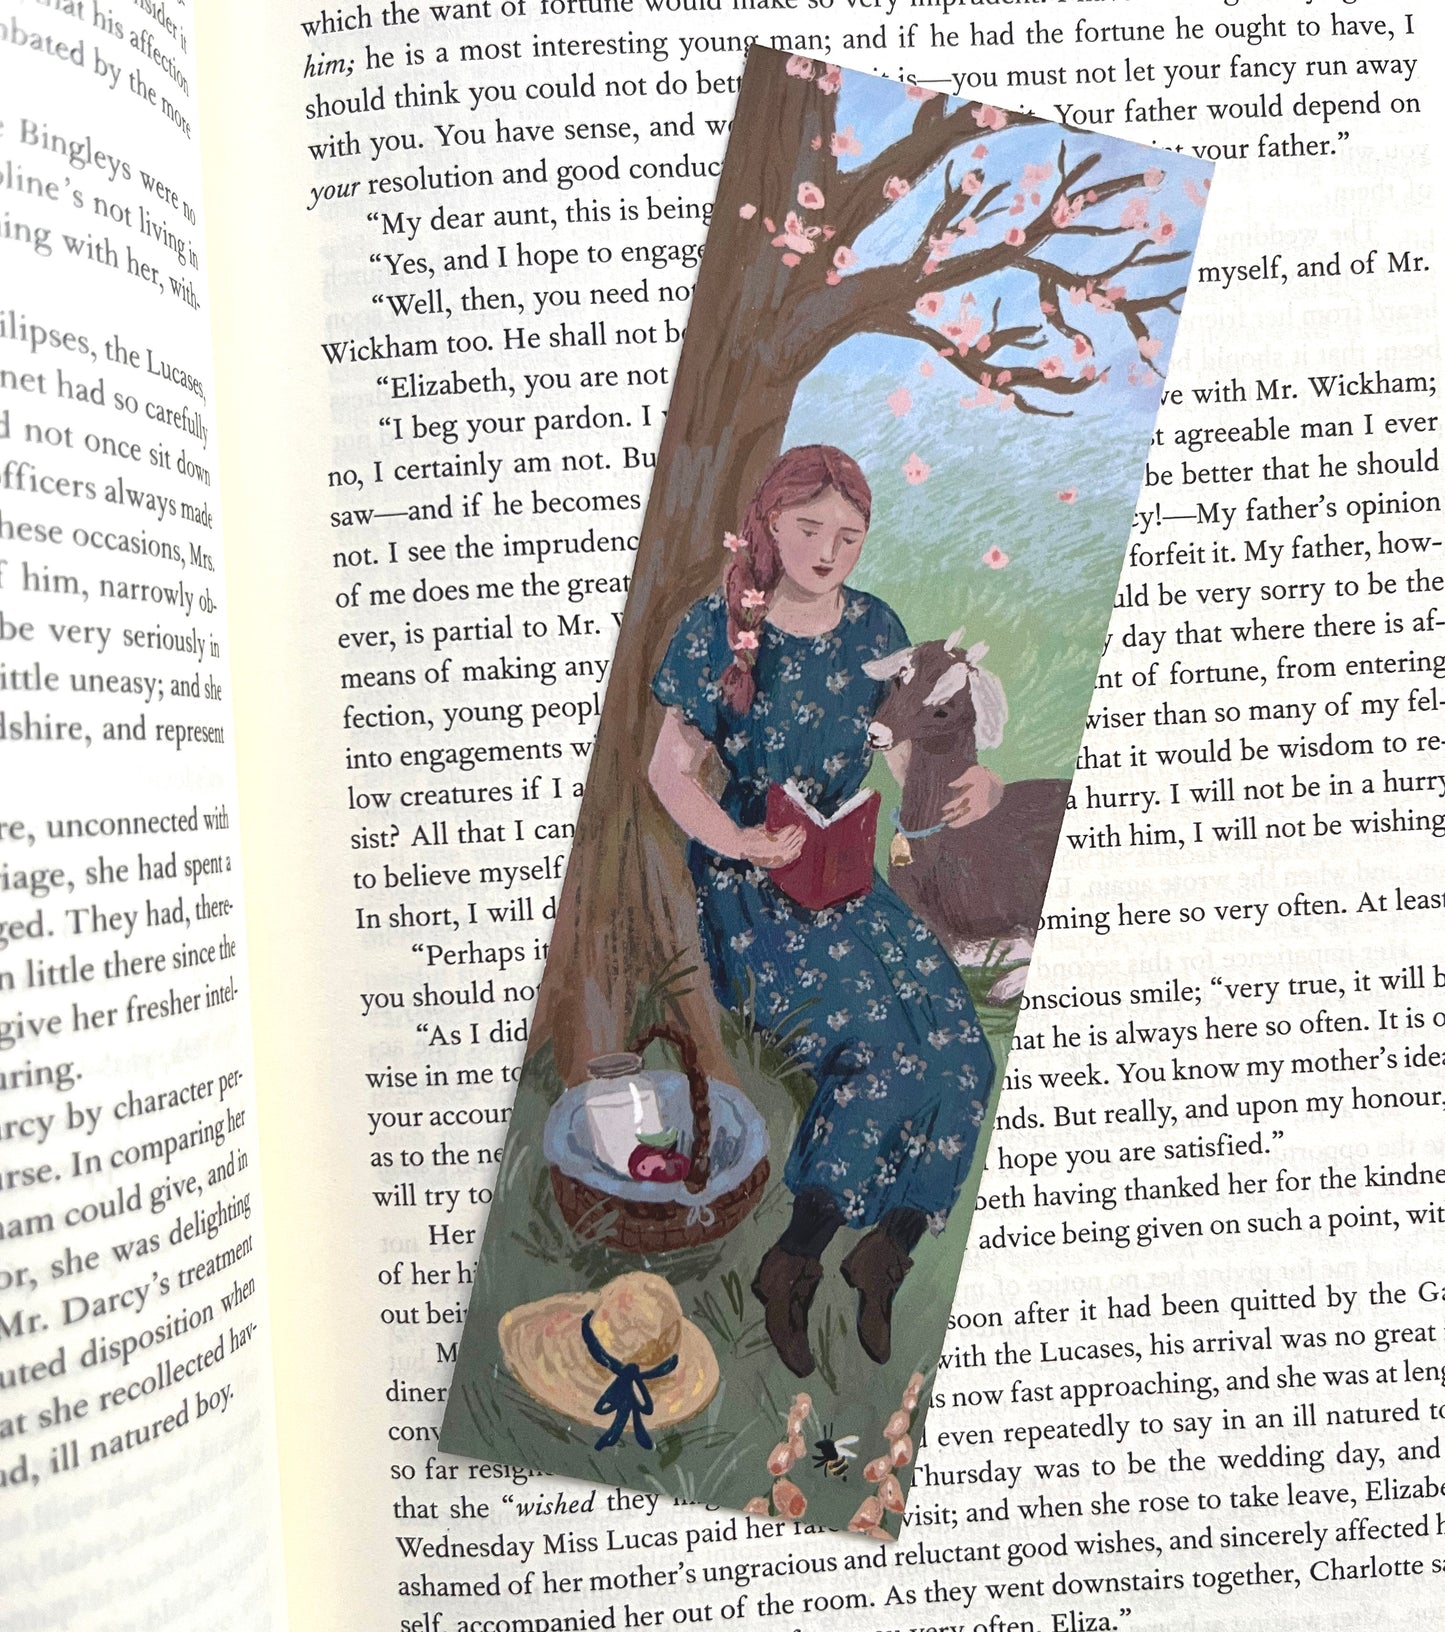 Country Day Double-Sided Bookmark